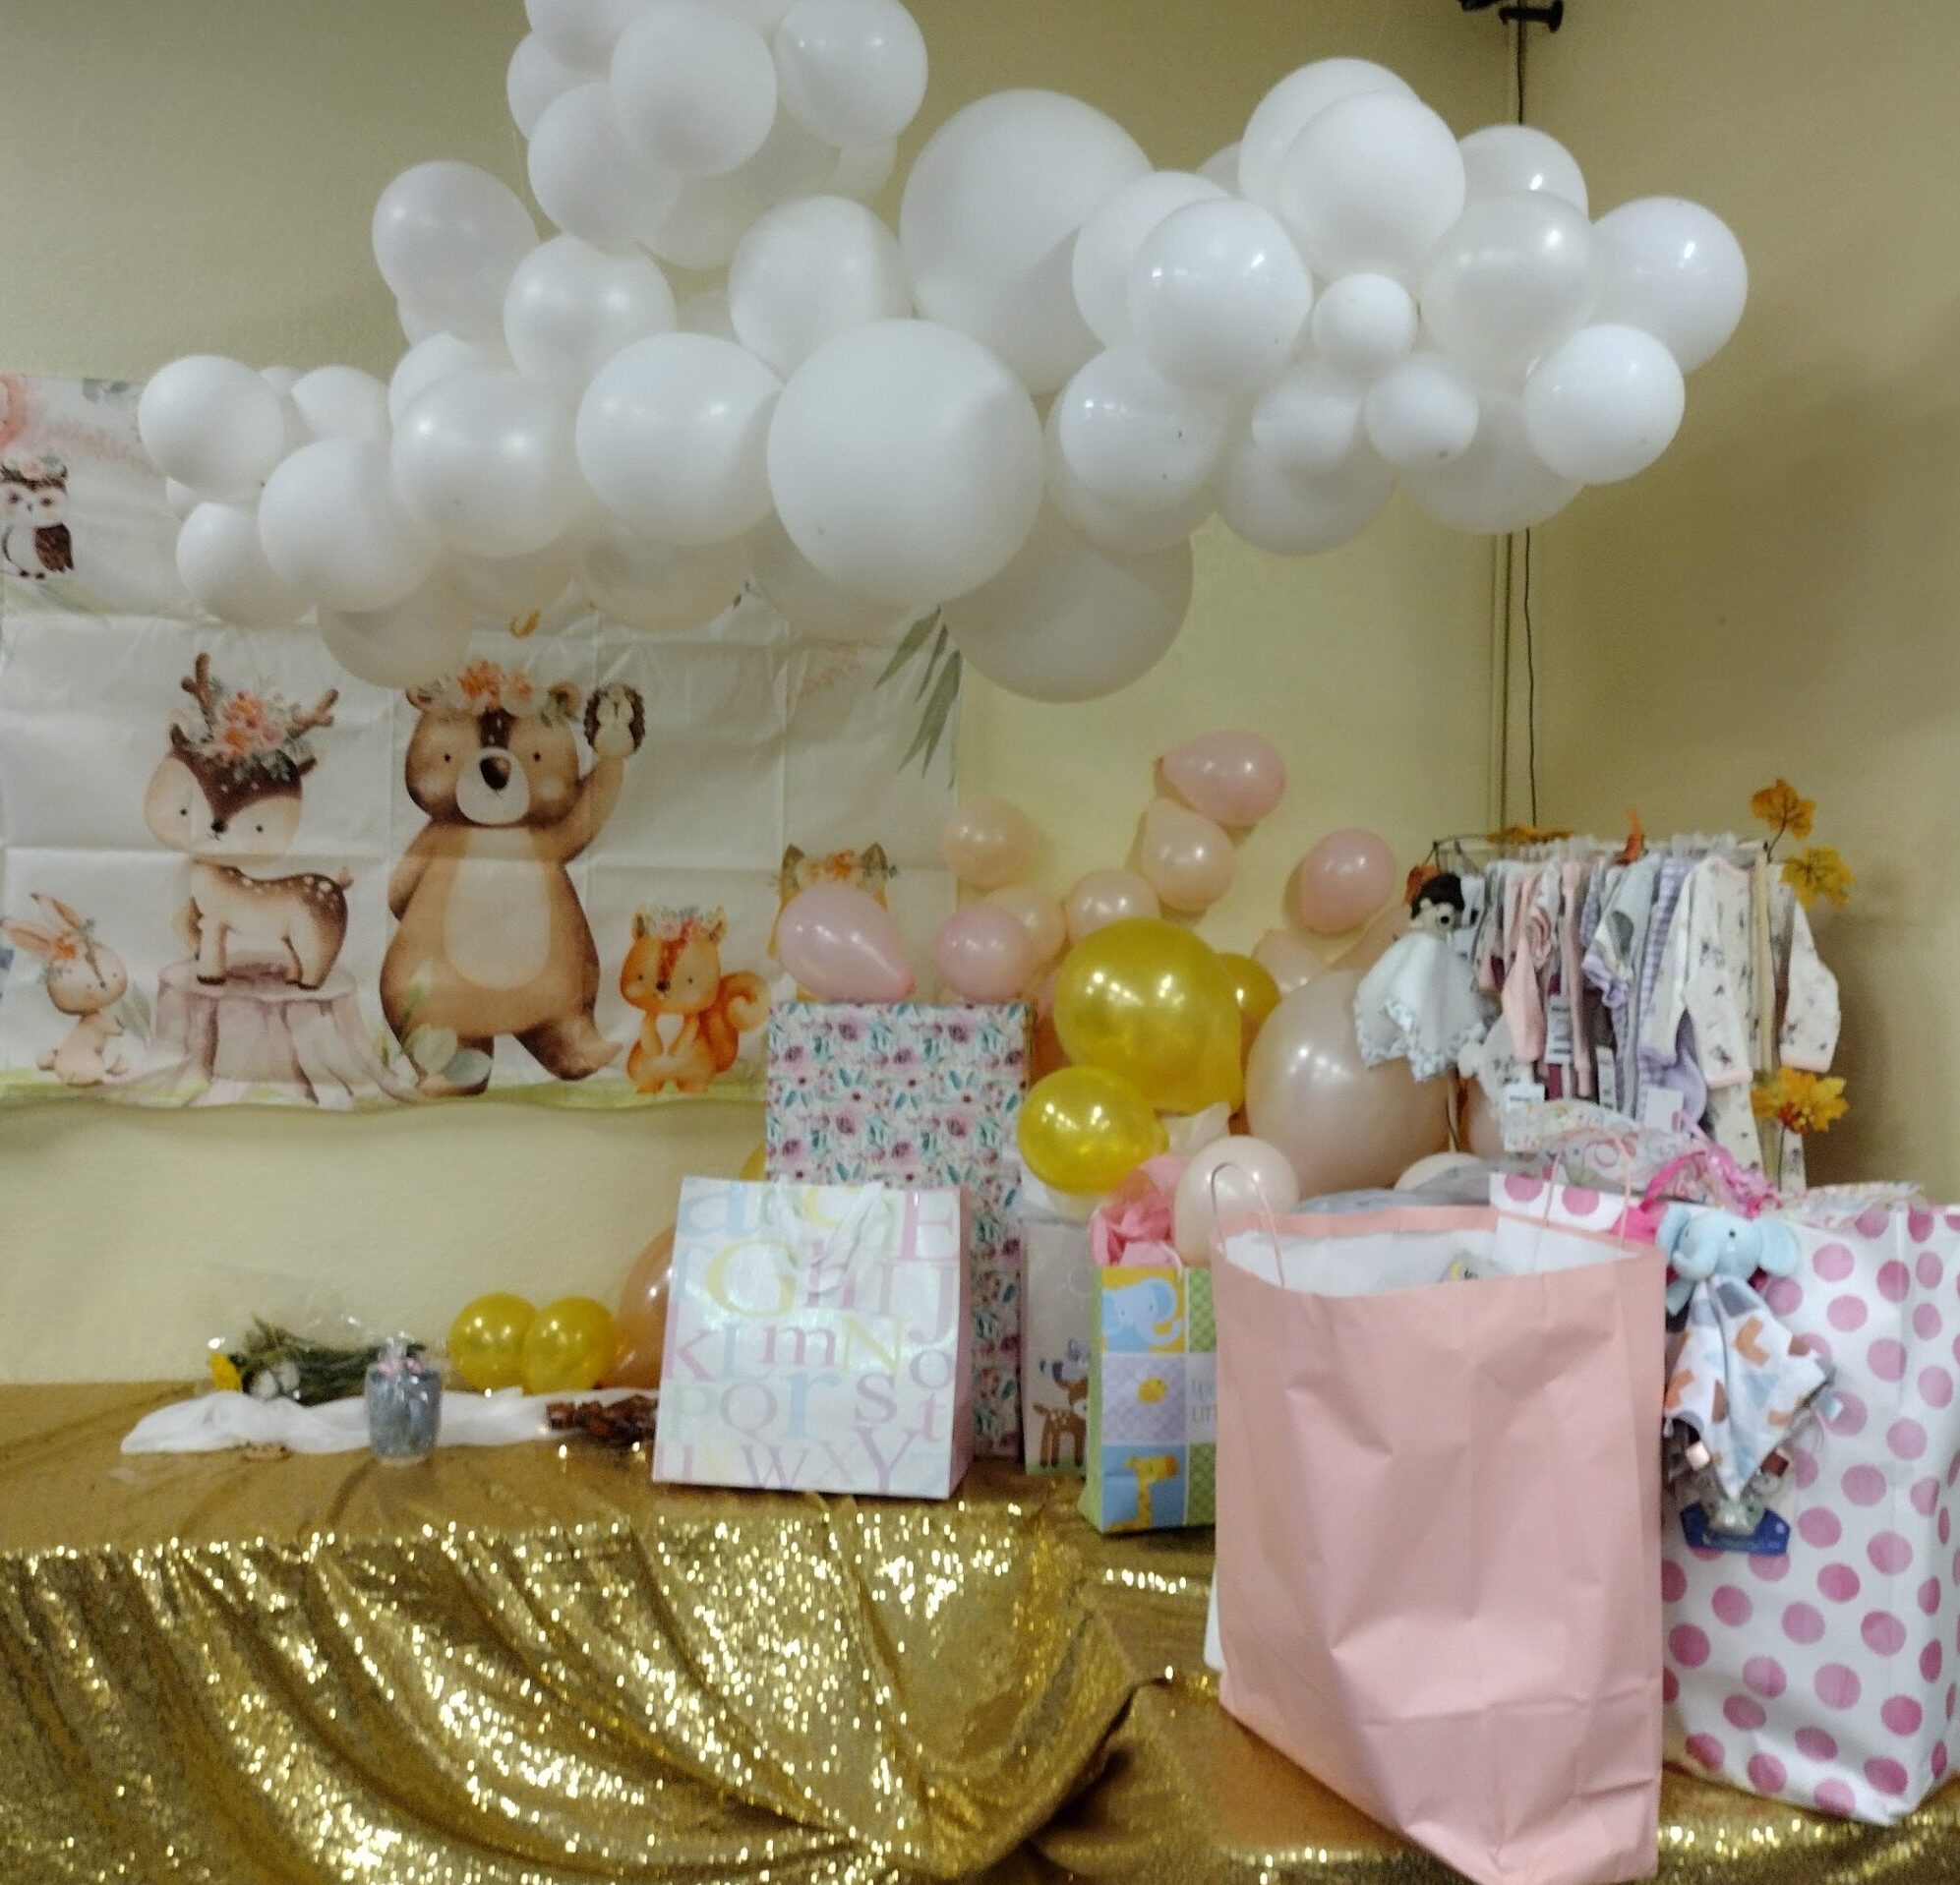 Hanging balloon cloud over gift table for baby shower